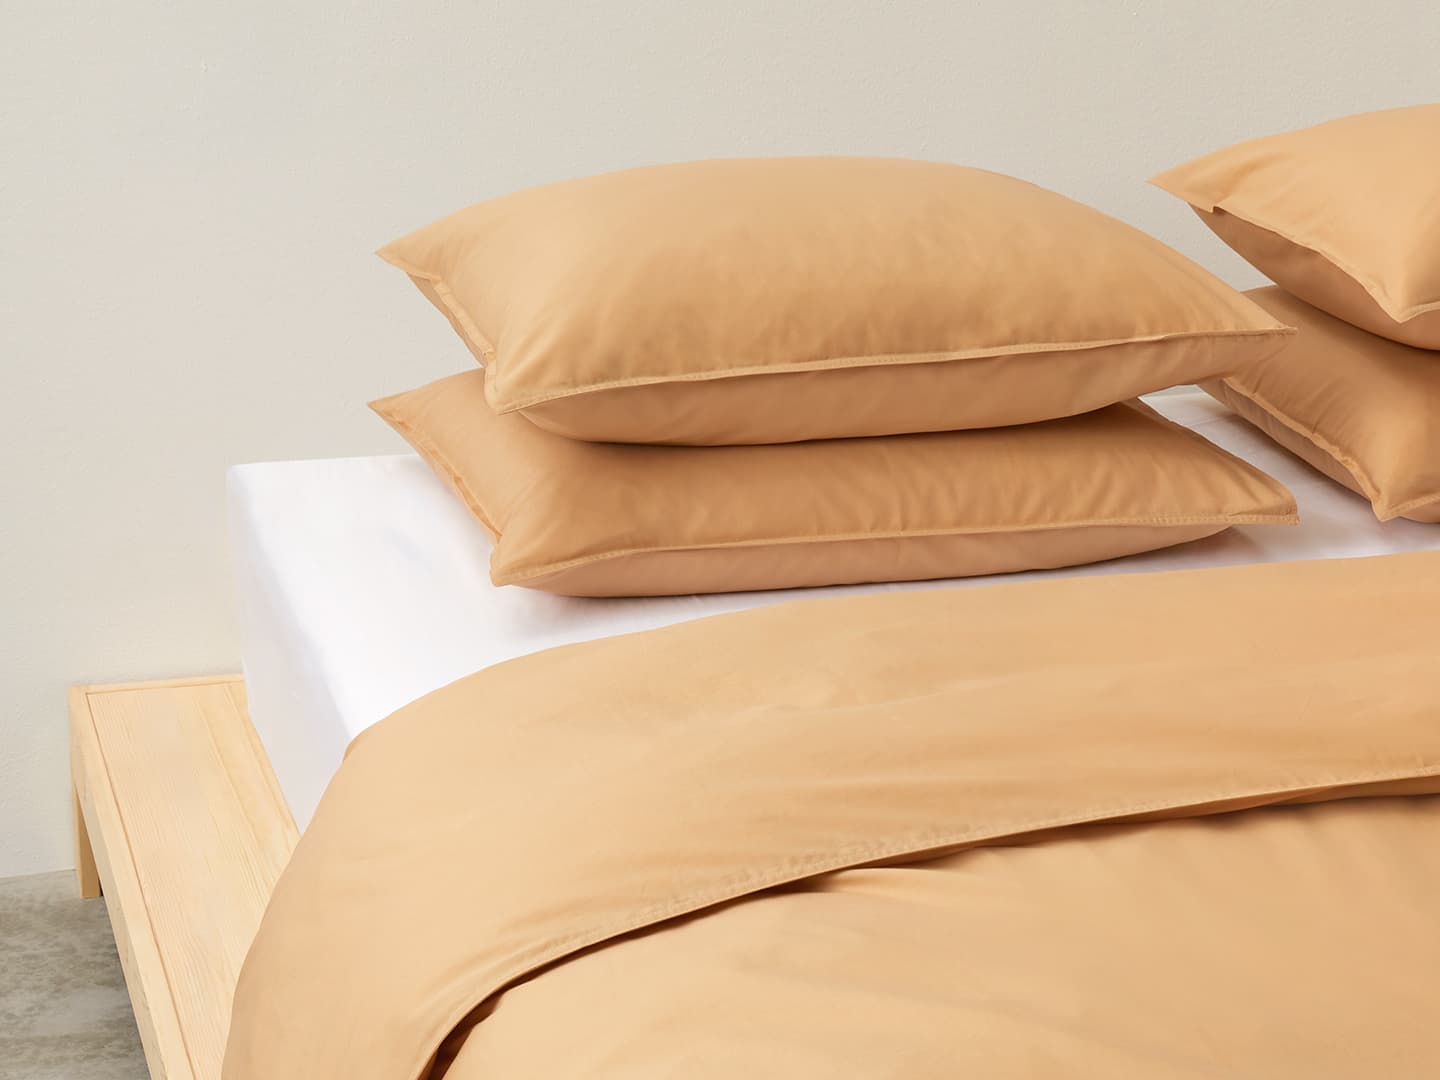 Duver Cover Nejd - Desert Sand in the group Bedding / Duvet Covers at A L V A (1191)